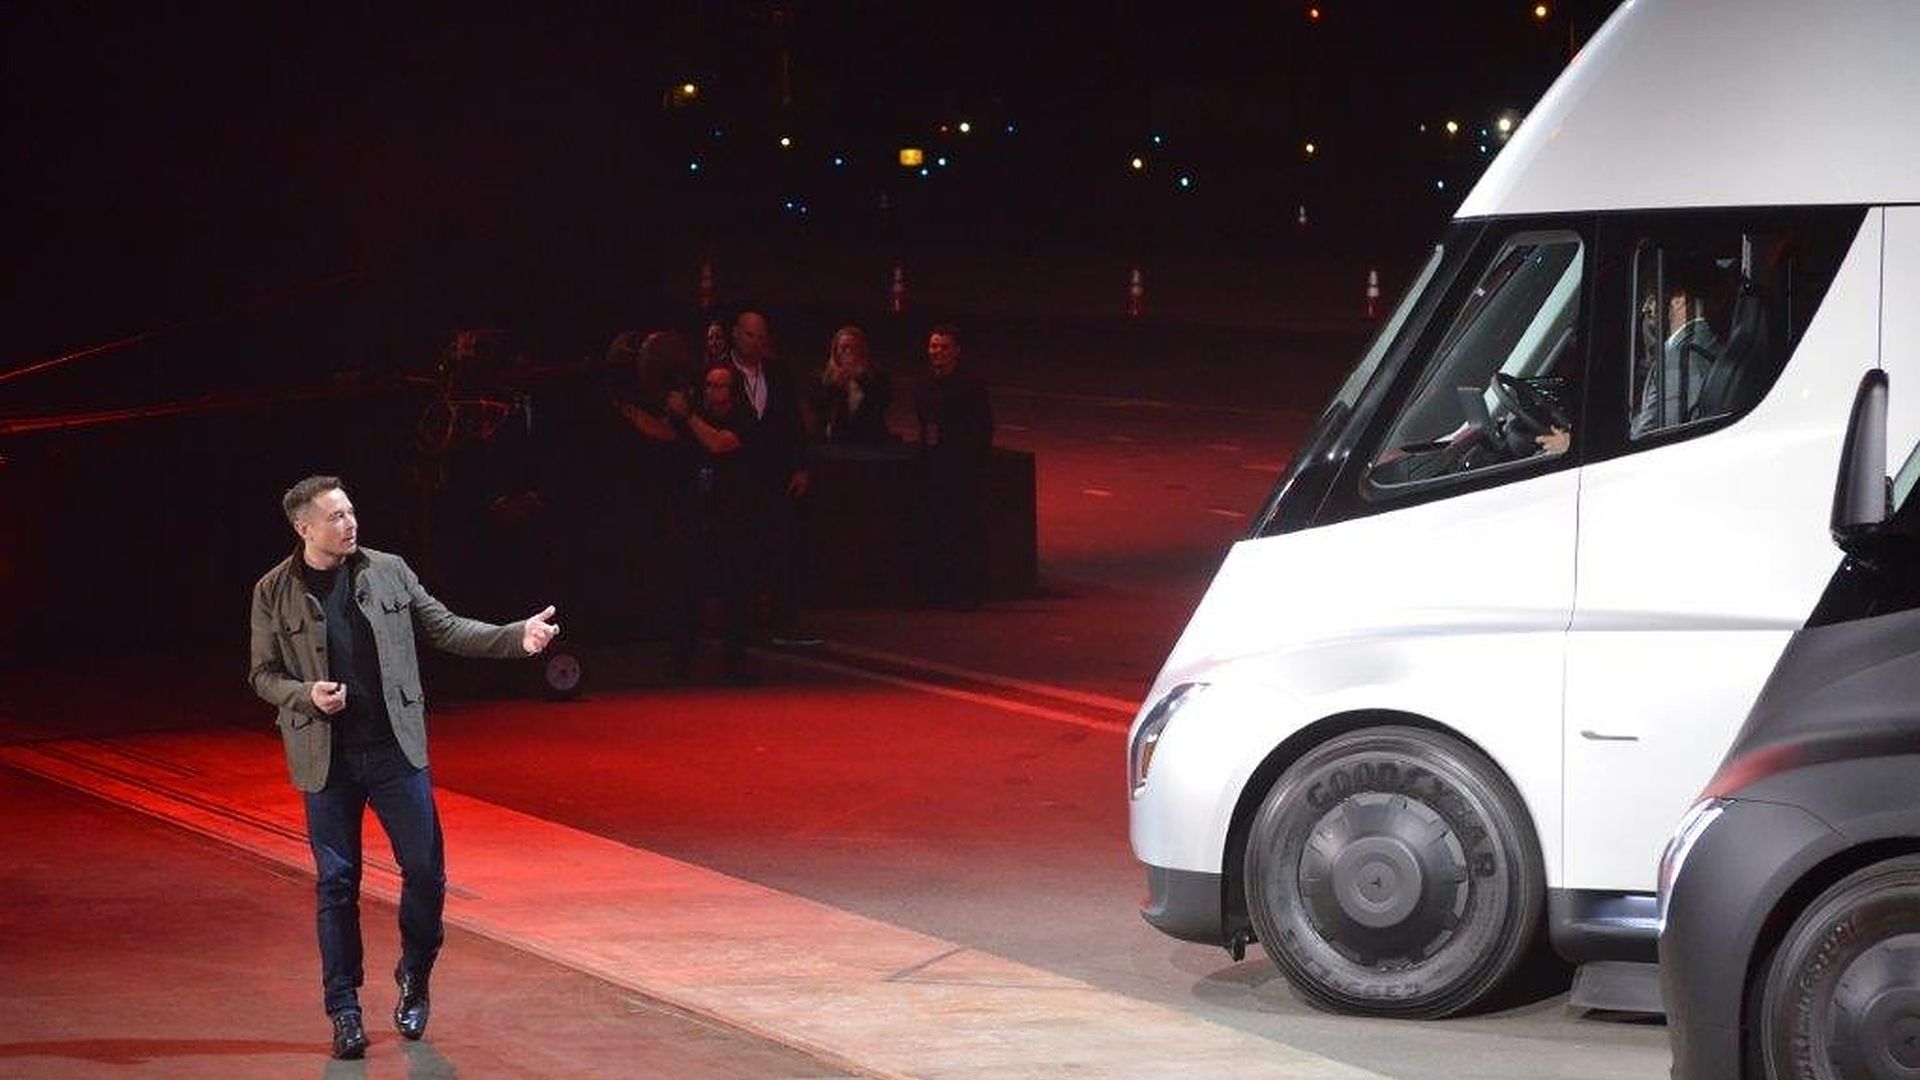 Tesla Chairman and CEO Elon Musk unveils the new "Semi" electric Truck to buyers and journalists on November 16, 2017 in Hawthorne, California, near Los Angeles. 